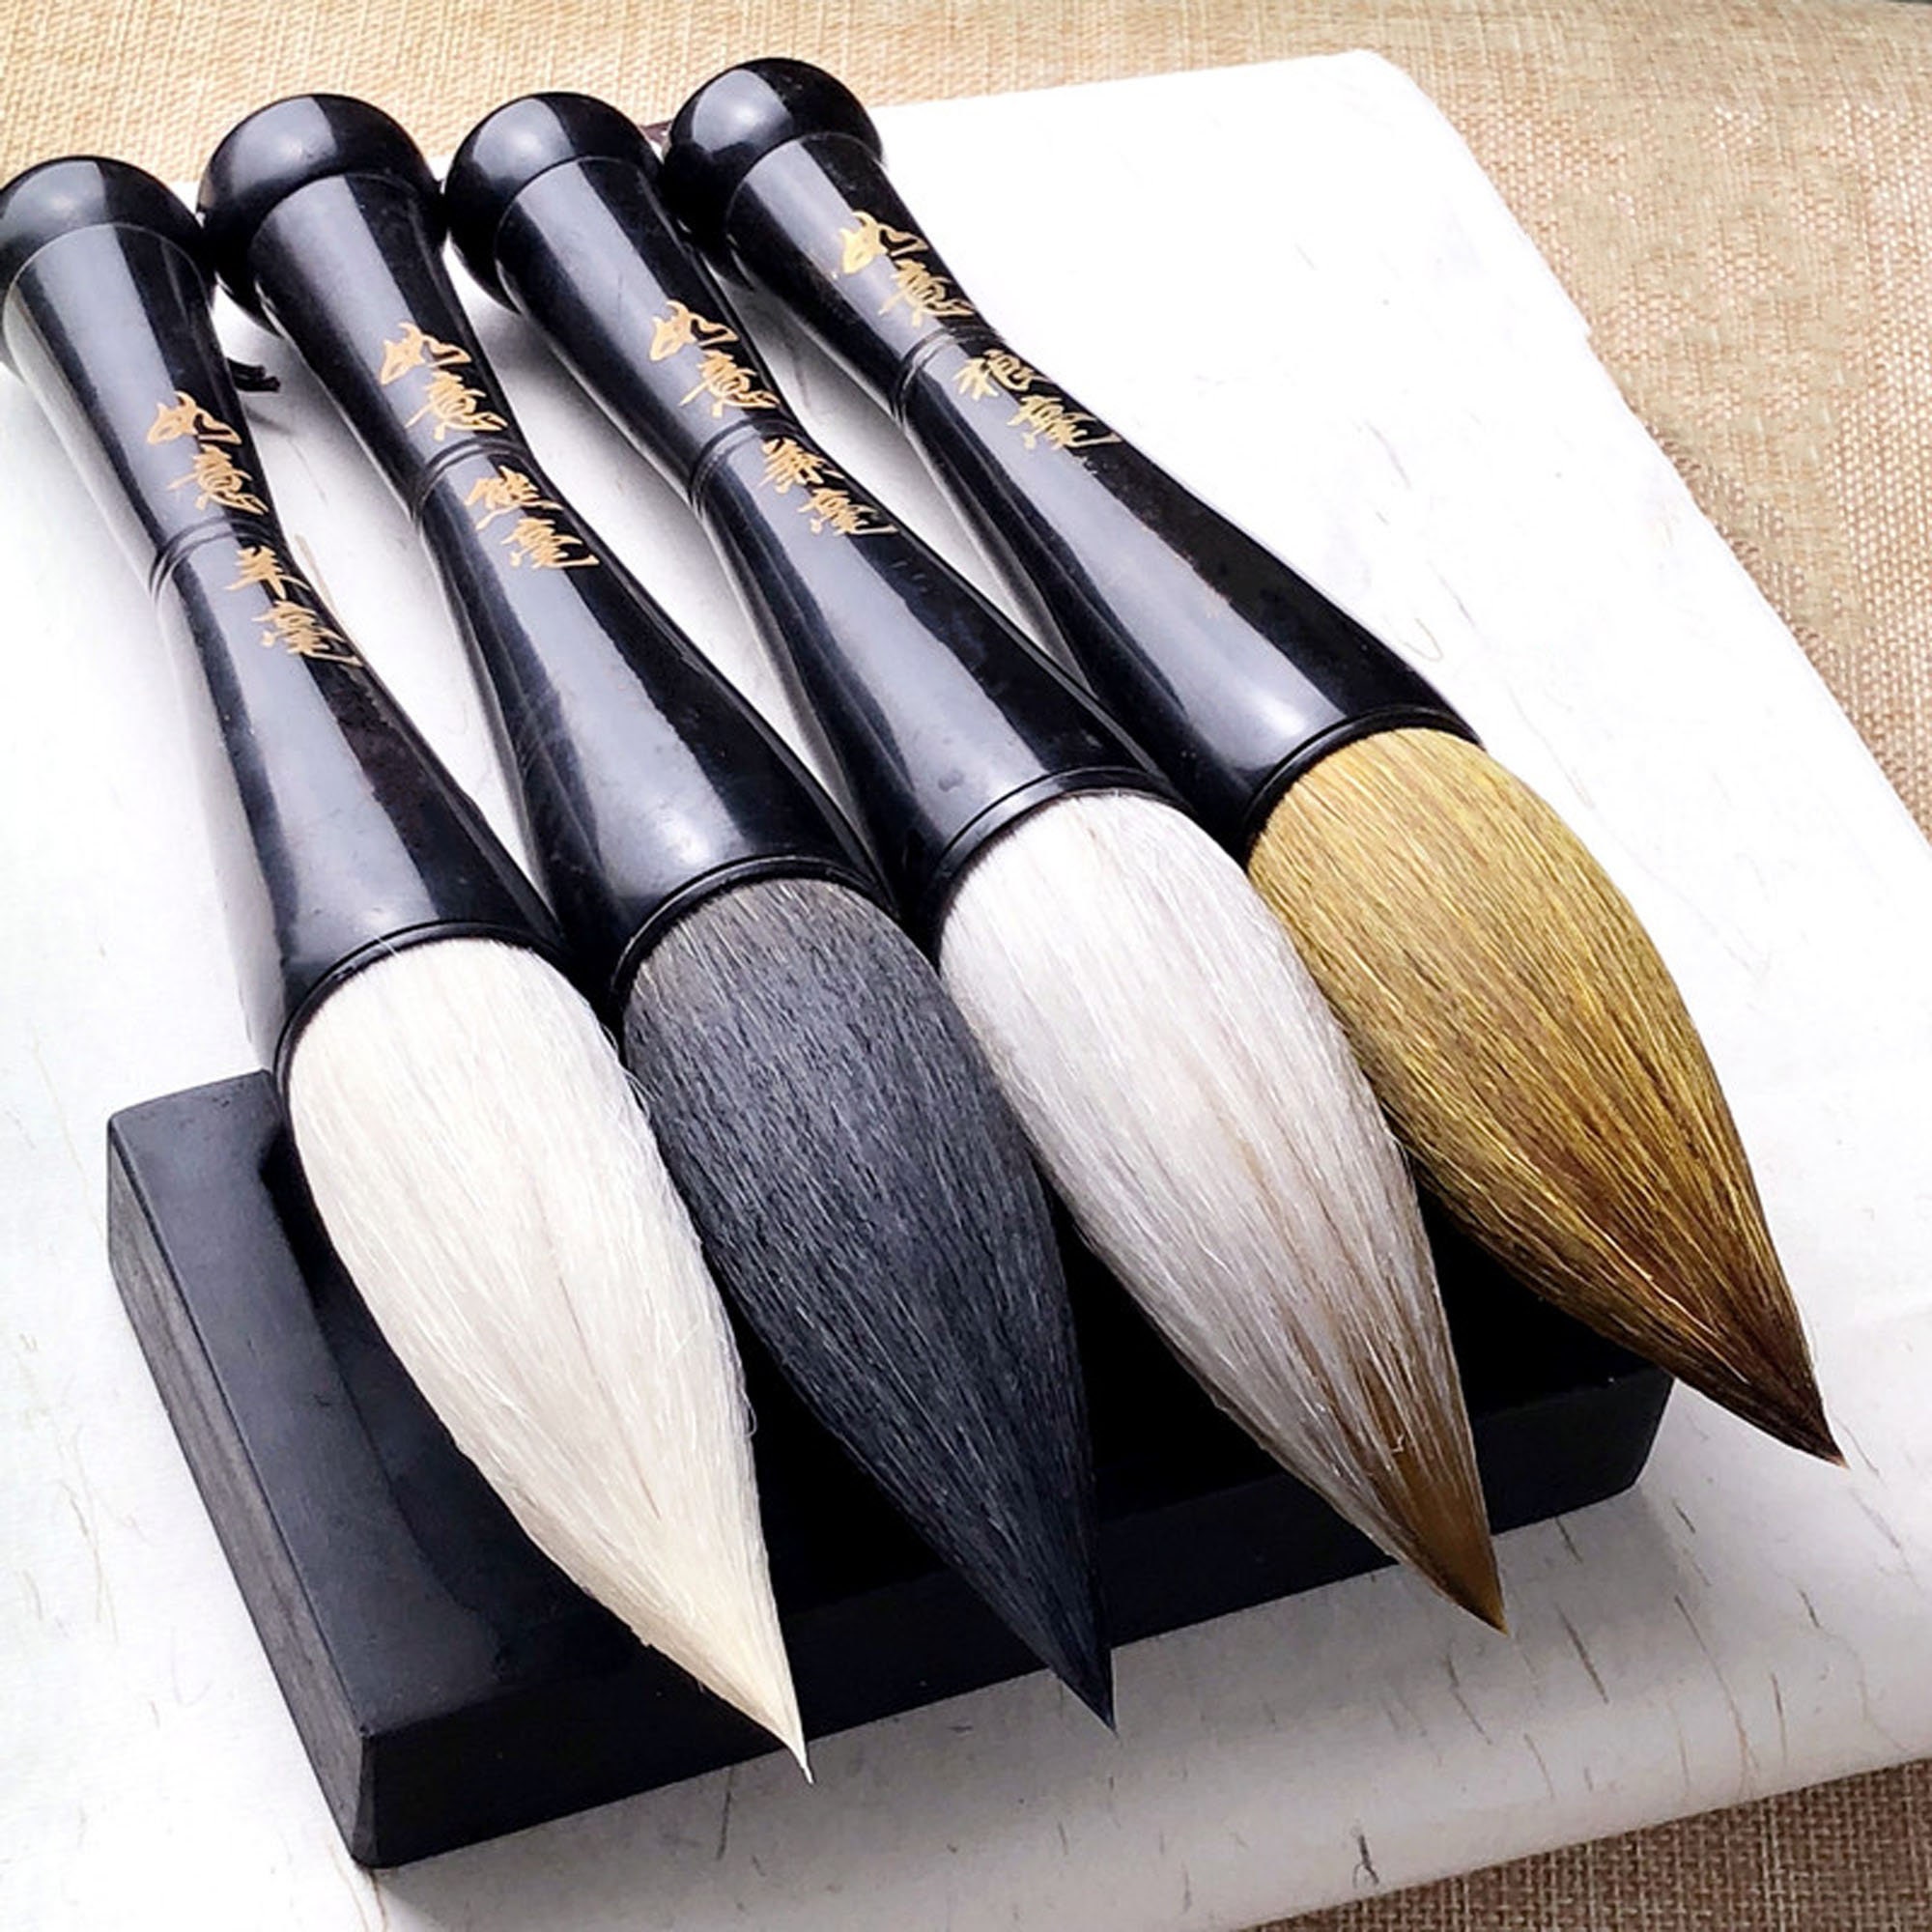 Giant 53 / 80 / 119 / 165cm Long Large Chinese Calligraphy Brushes for  Decorate / Dancing/ Performance 1 Pc, White Hair 